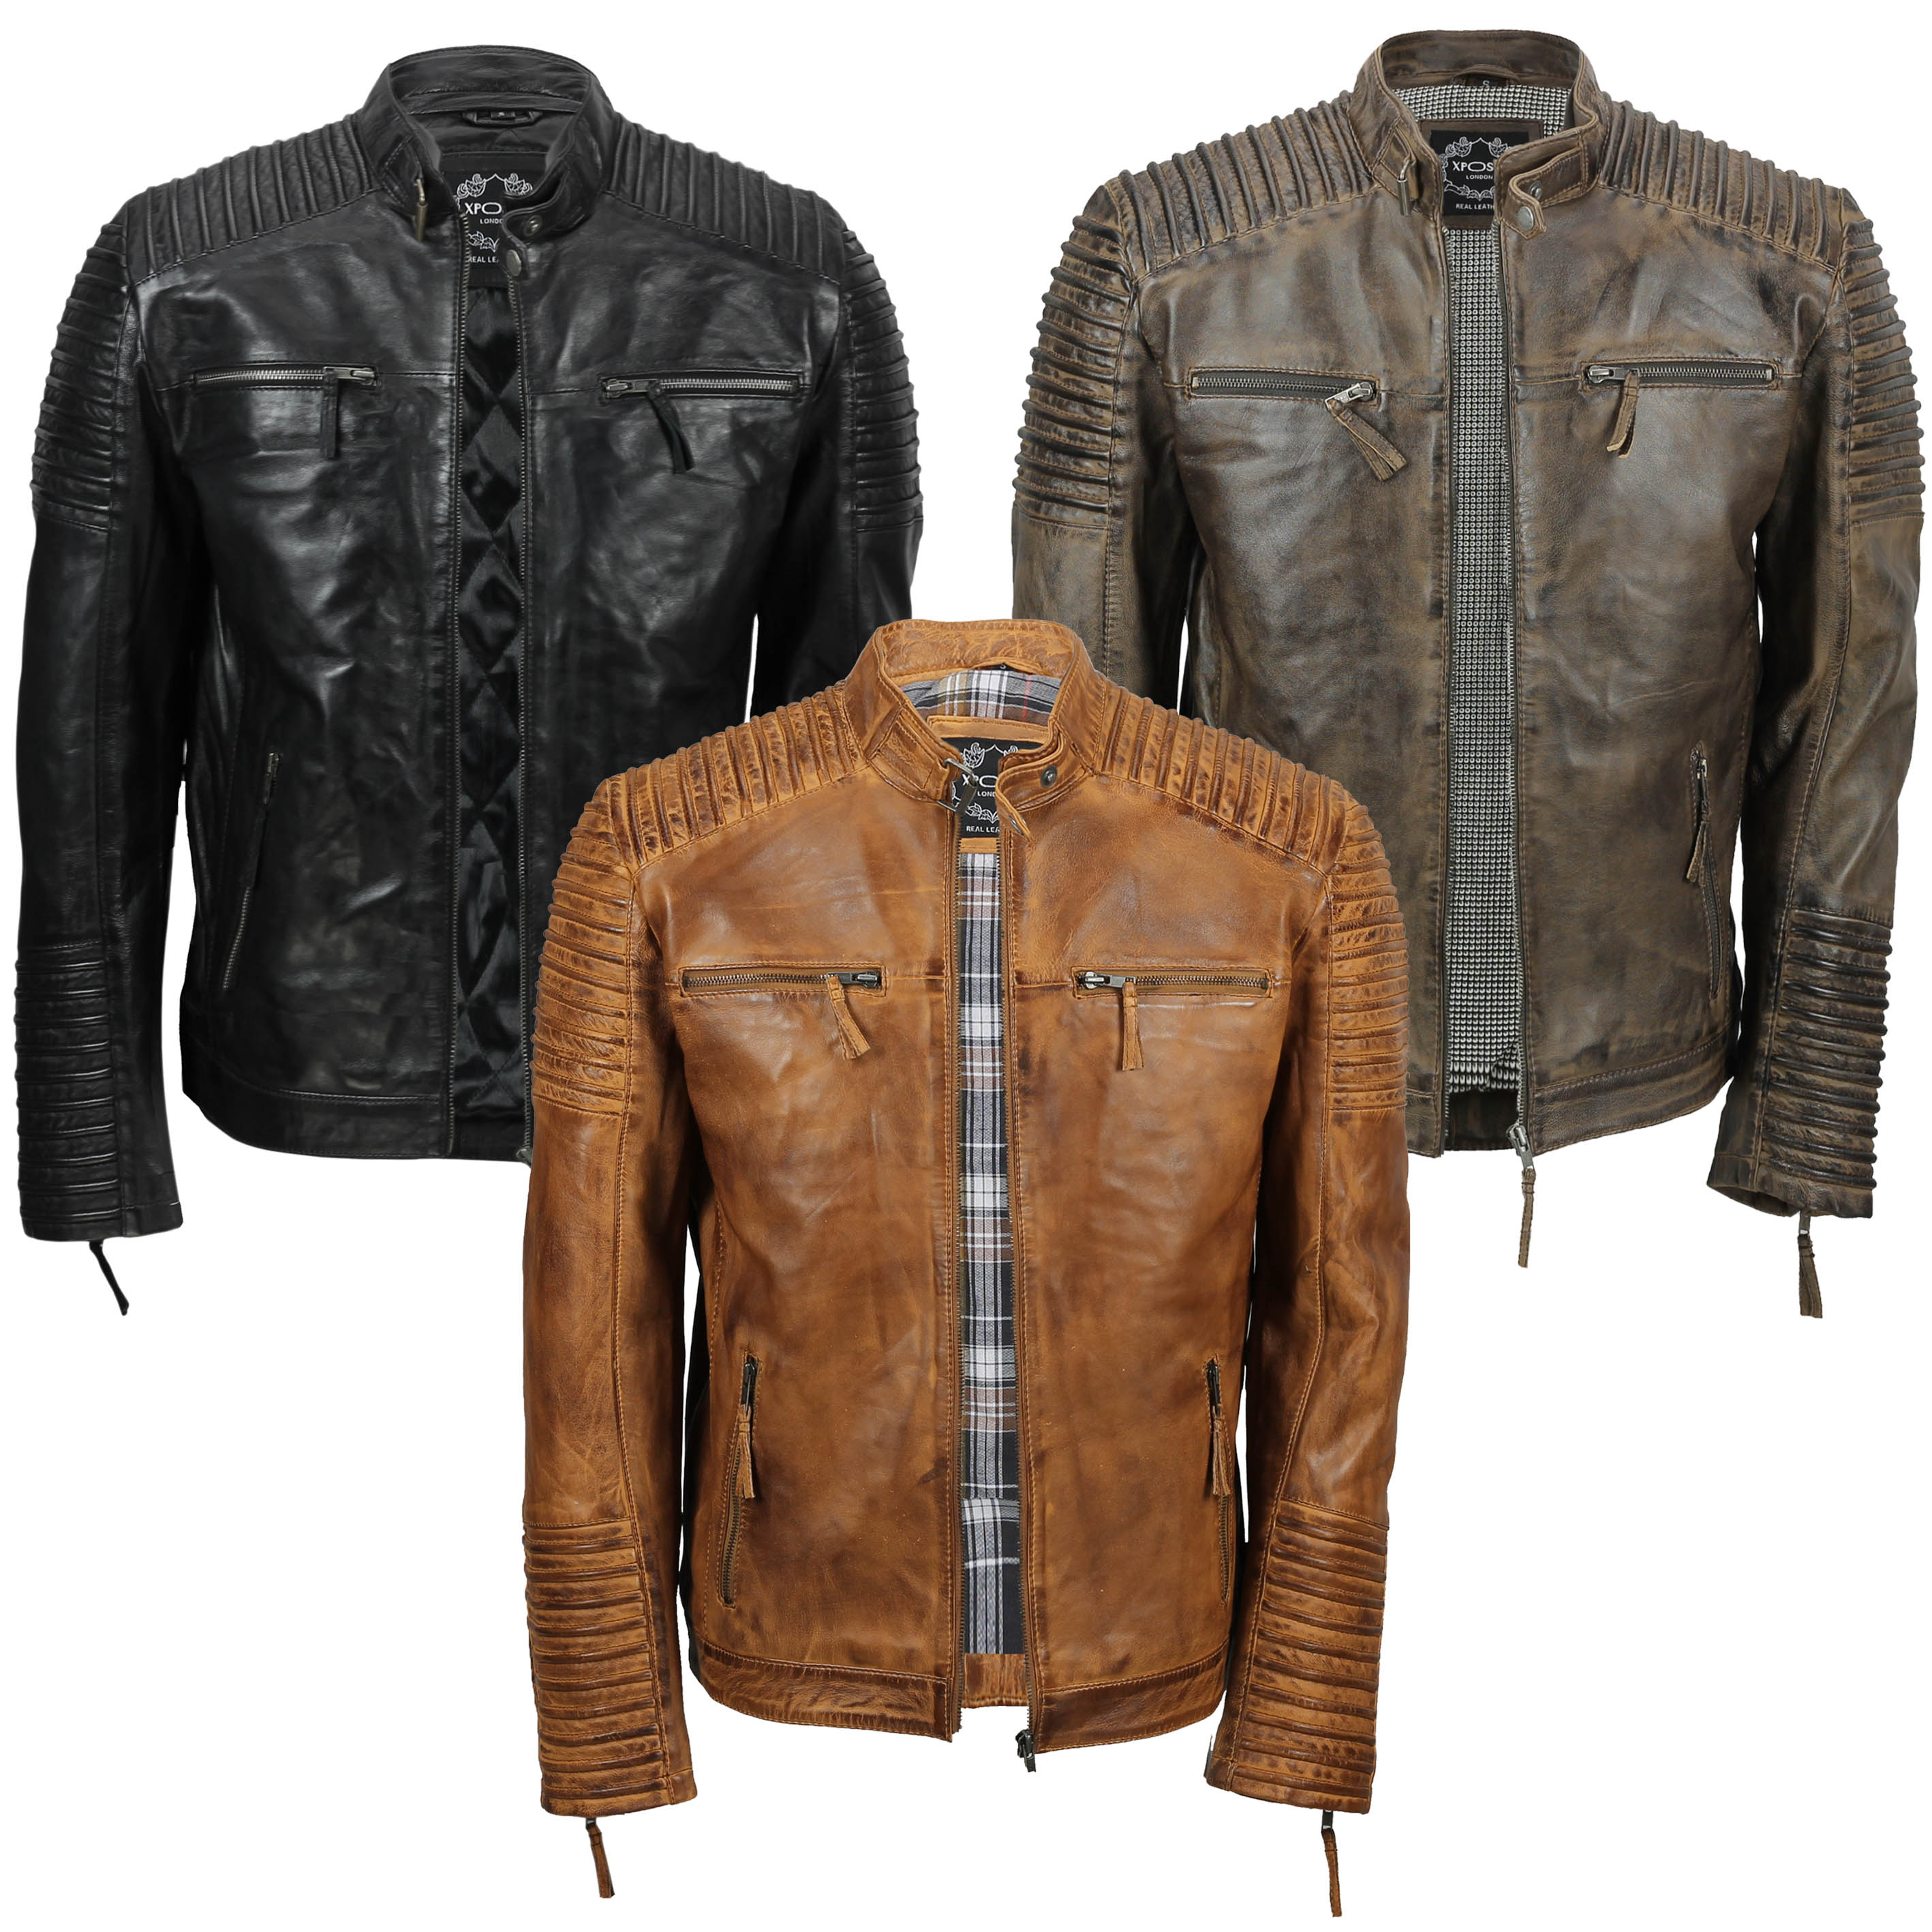 Men/'s Motorcycle Rider/'s Jacket Size 42 Brown Retro Vintage Protech Leather Apparel Quilted Lining Brass Hardware 1990s Coats Jackets